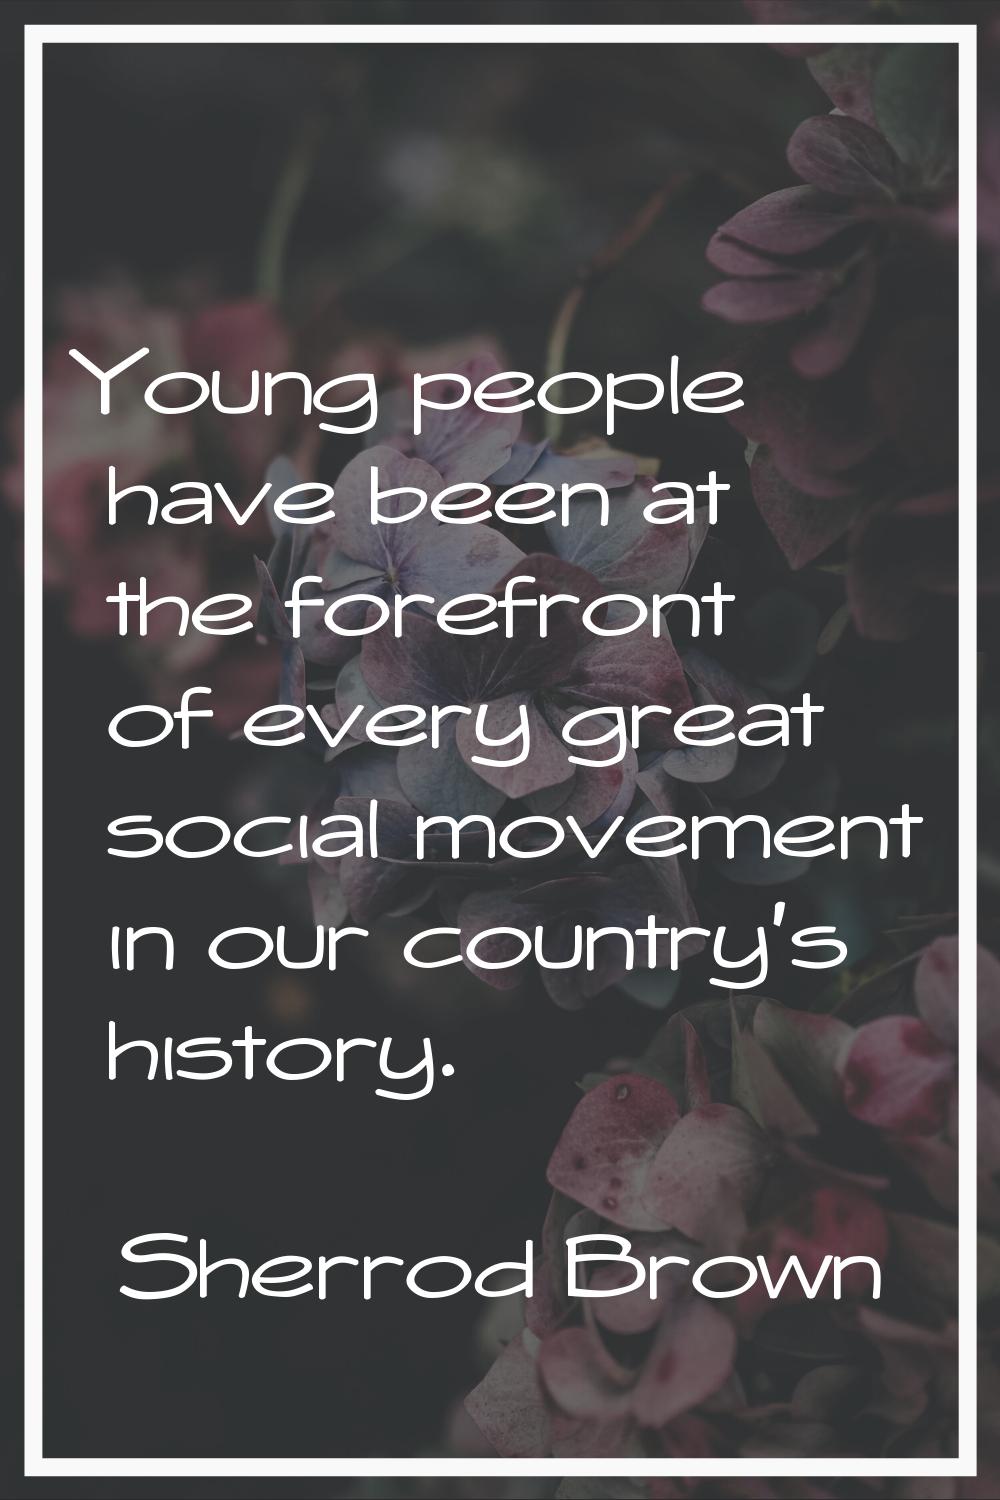 Young people have been at the forefront of every great social movement in our country's history.